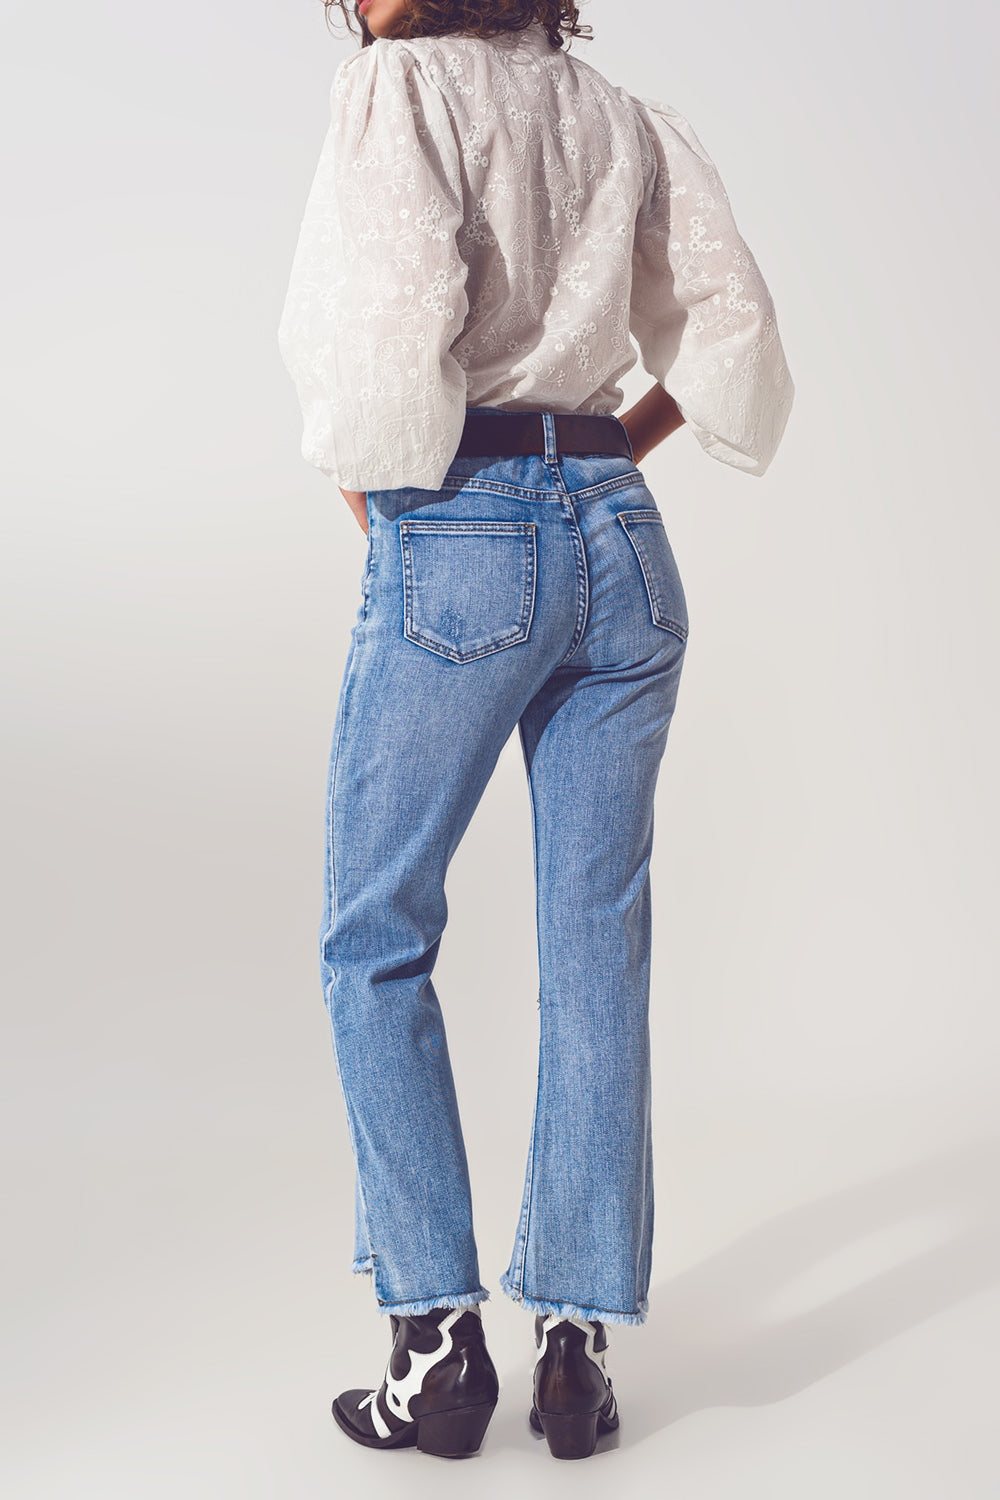 Flared Jeans in Light Blue With Asymmetric Hem